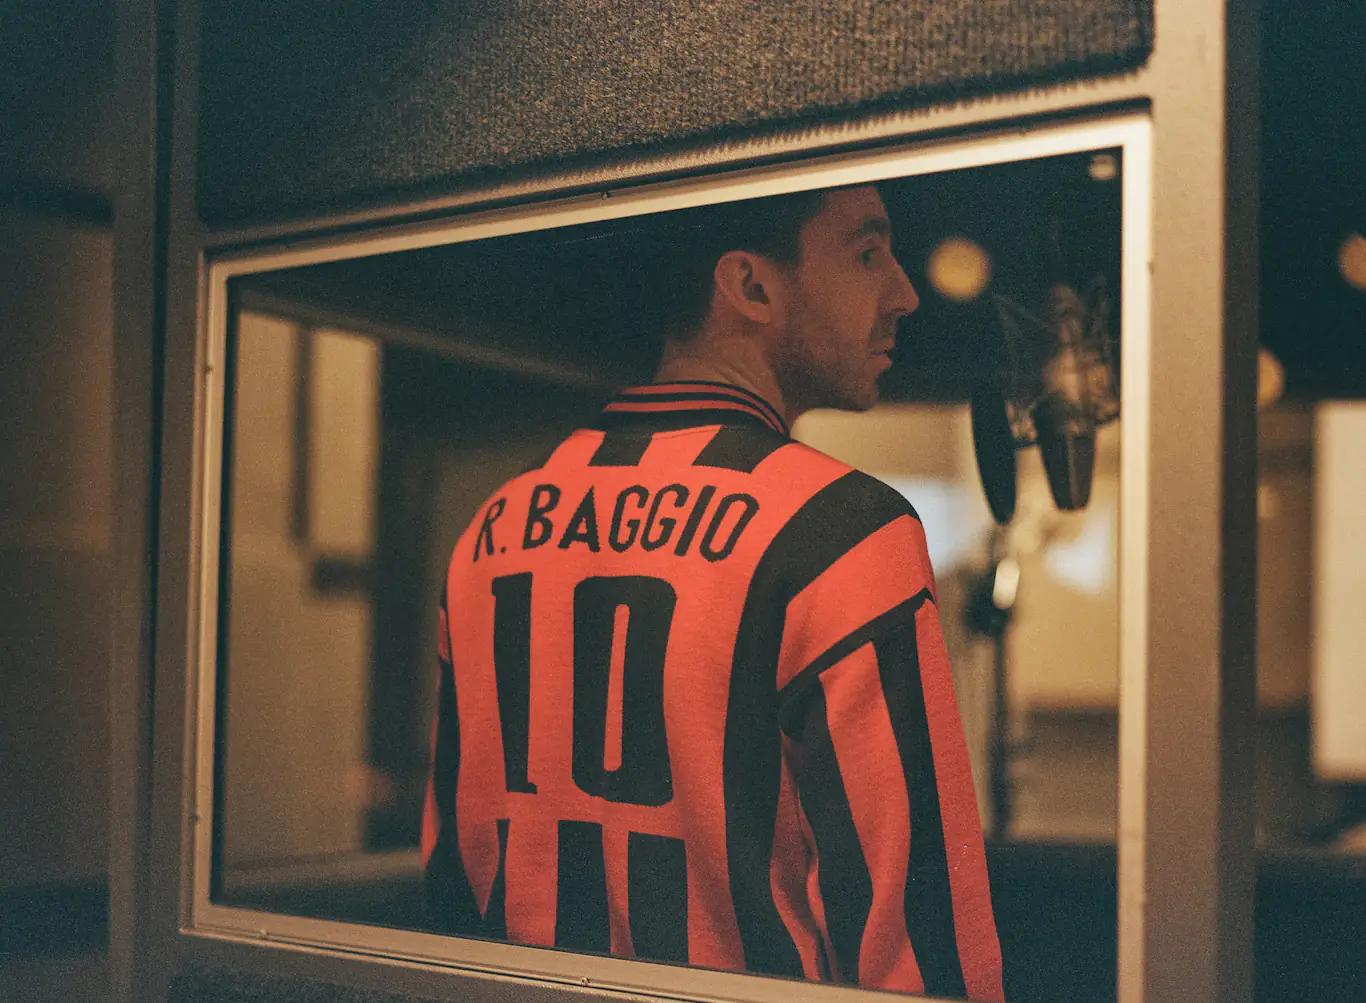 MILES KANE releases new single ‘Baggio’ from his forthcoming new album ‘One Man Band’